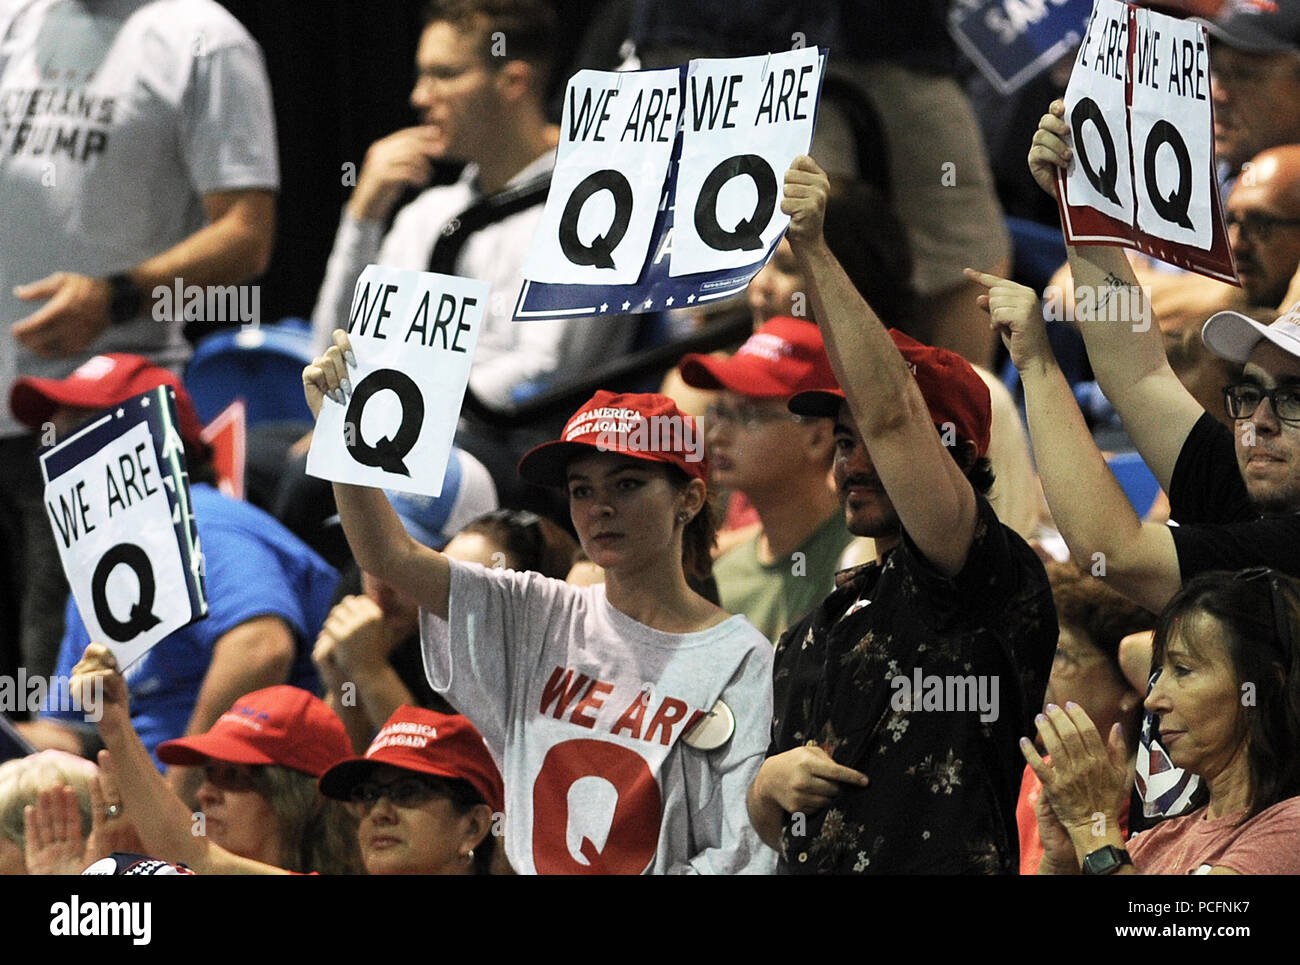 Tampa, Florida, USA. July 31, 2018 - Tampa, Florida, United States - Attendees at U.S. President Donald Trump's Make America Great Again Rally hold signs reading, 'We Are Q' on July 31, 2018 at the Florida State Fairgrounds in Tampa, Florida. The self-described followers of 'Q', an anonymous person or group of people who claim to be privy to government secrets, are believers in a fringe internet conspiracy theory called 'QAnon'. (Paul Hennessy/Alamy) Credit: Paul Hennessy/Alamy Live News Stock Photo